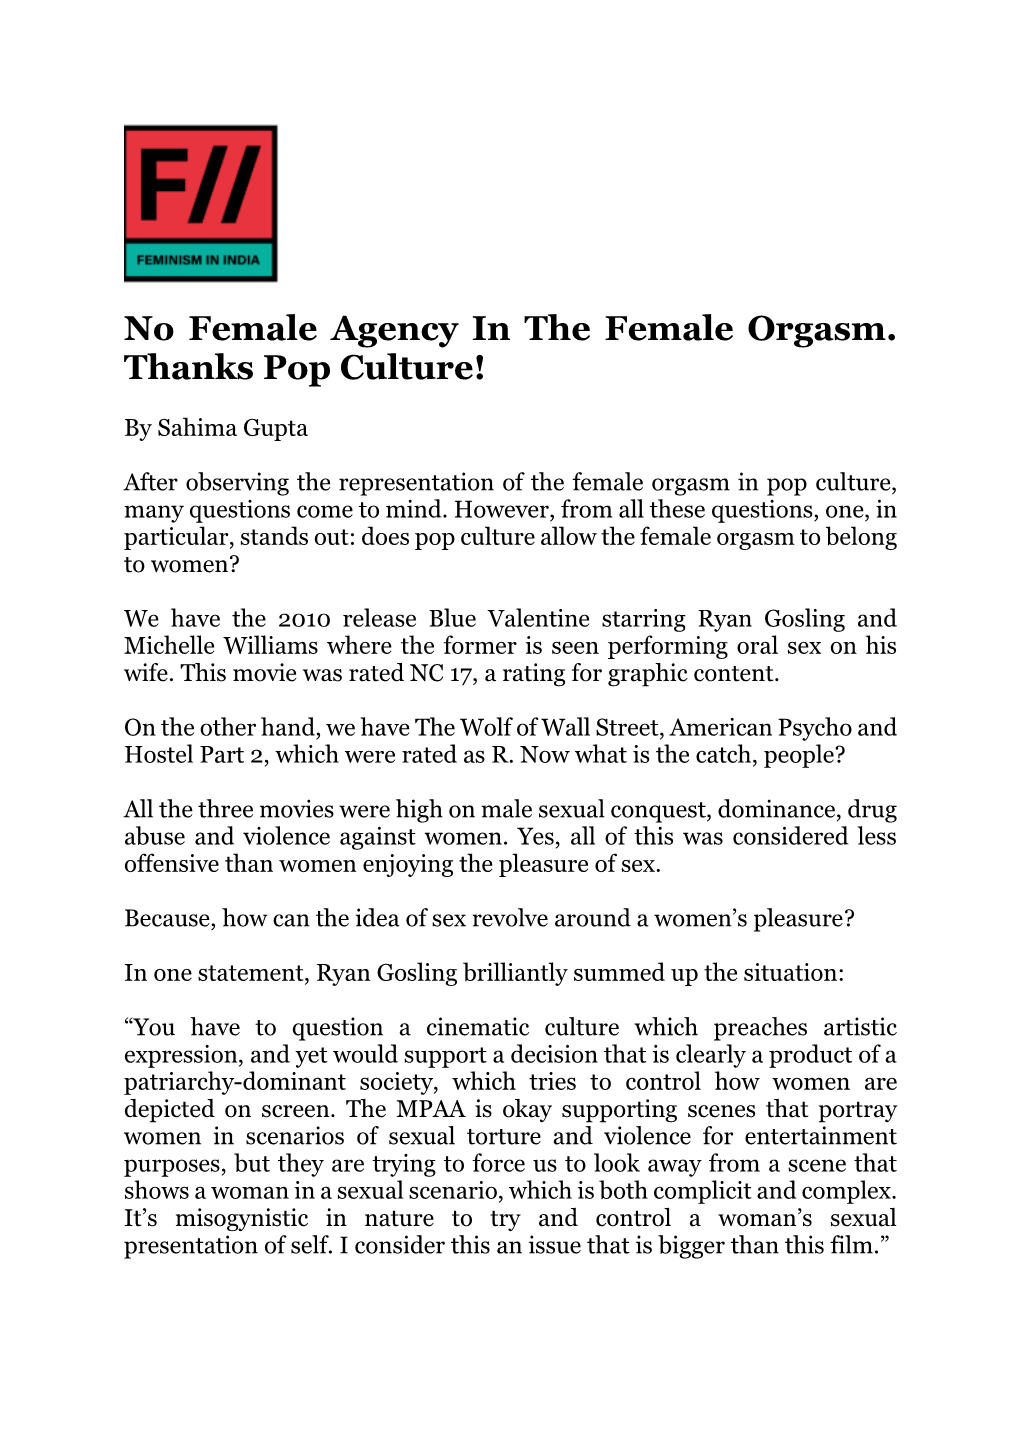 No Female Agency in the Female Orgasm. Thanks Pop Culture!